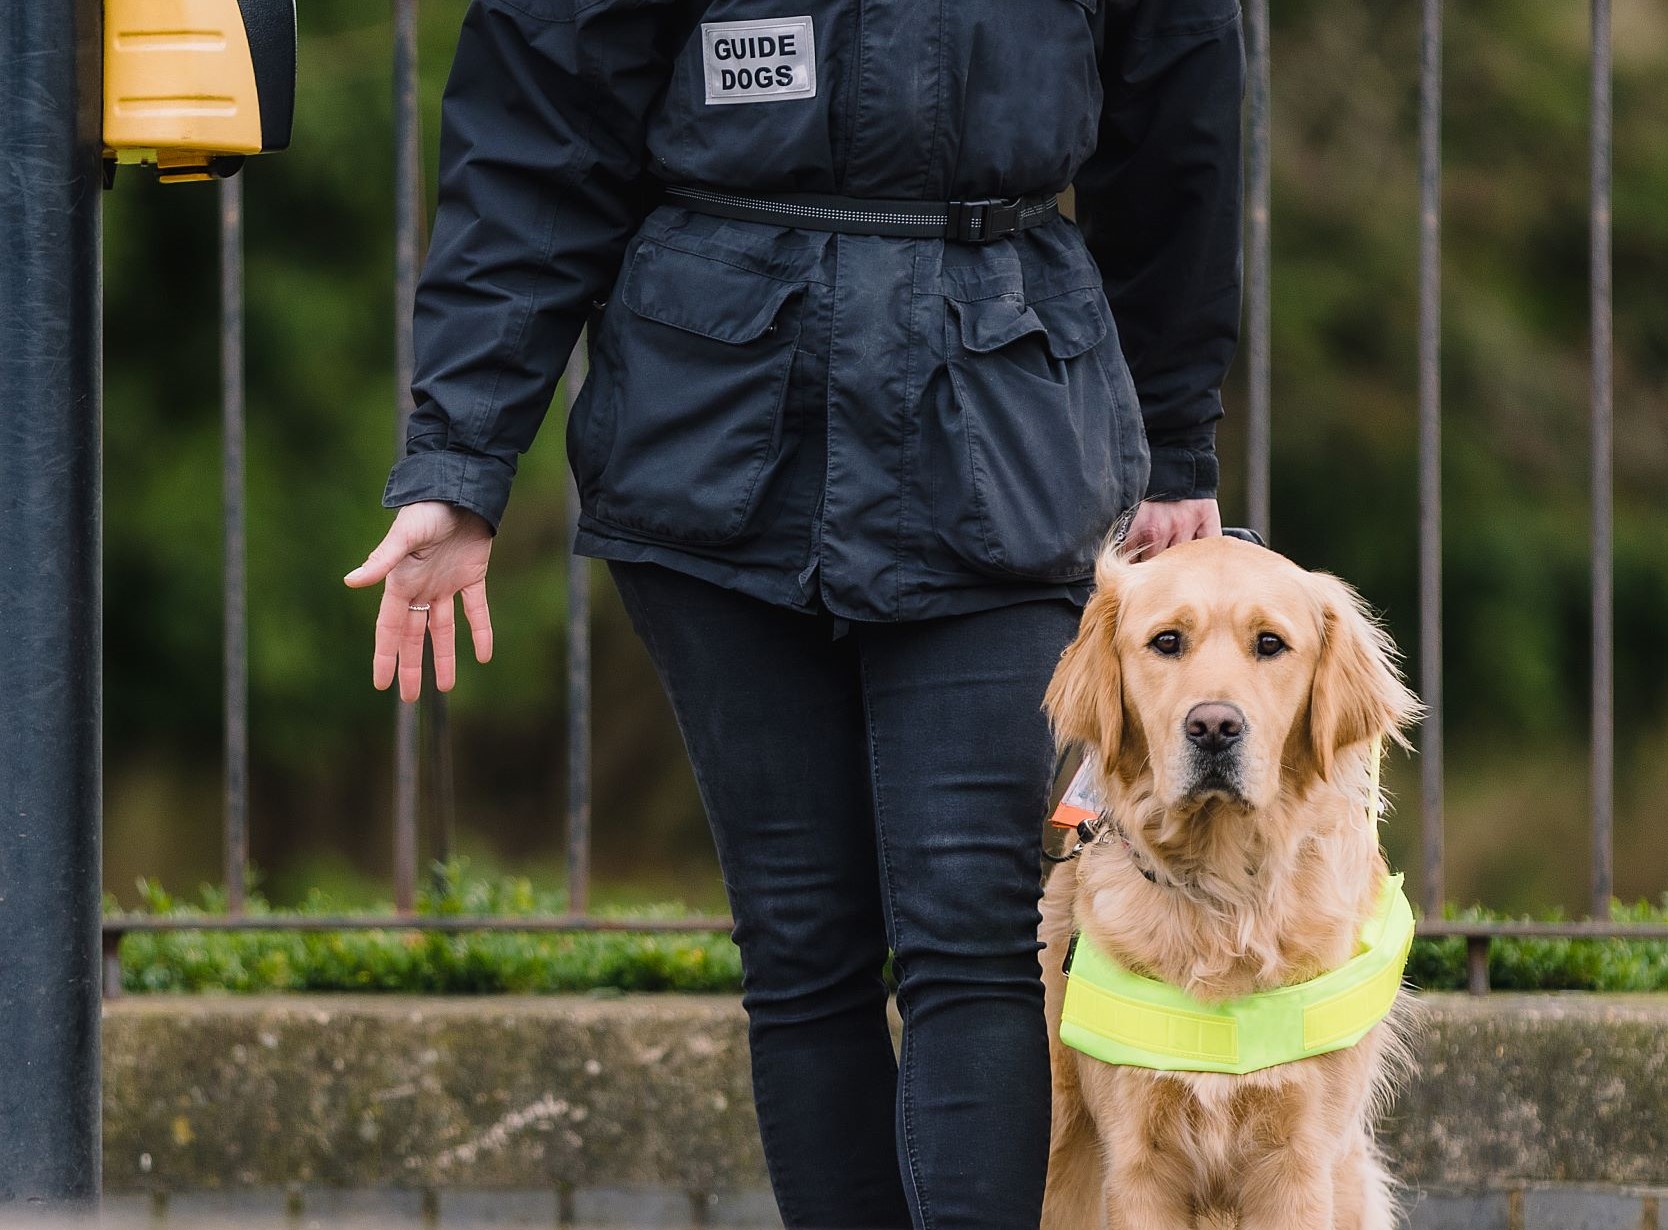 A head on shot of a golden retriever guide dog at a road crossing. The trainer's lower body is pictured next to the dog.